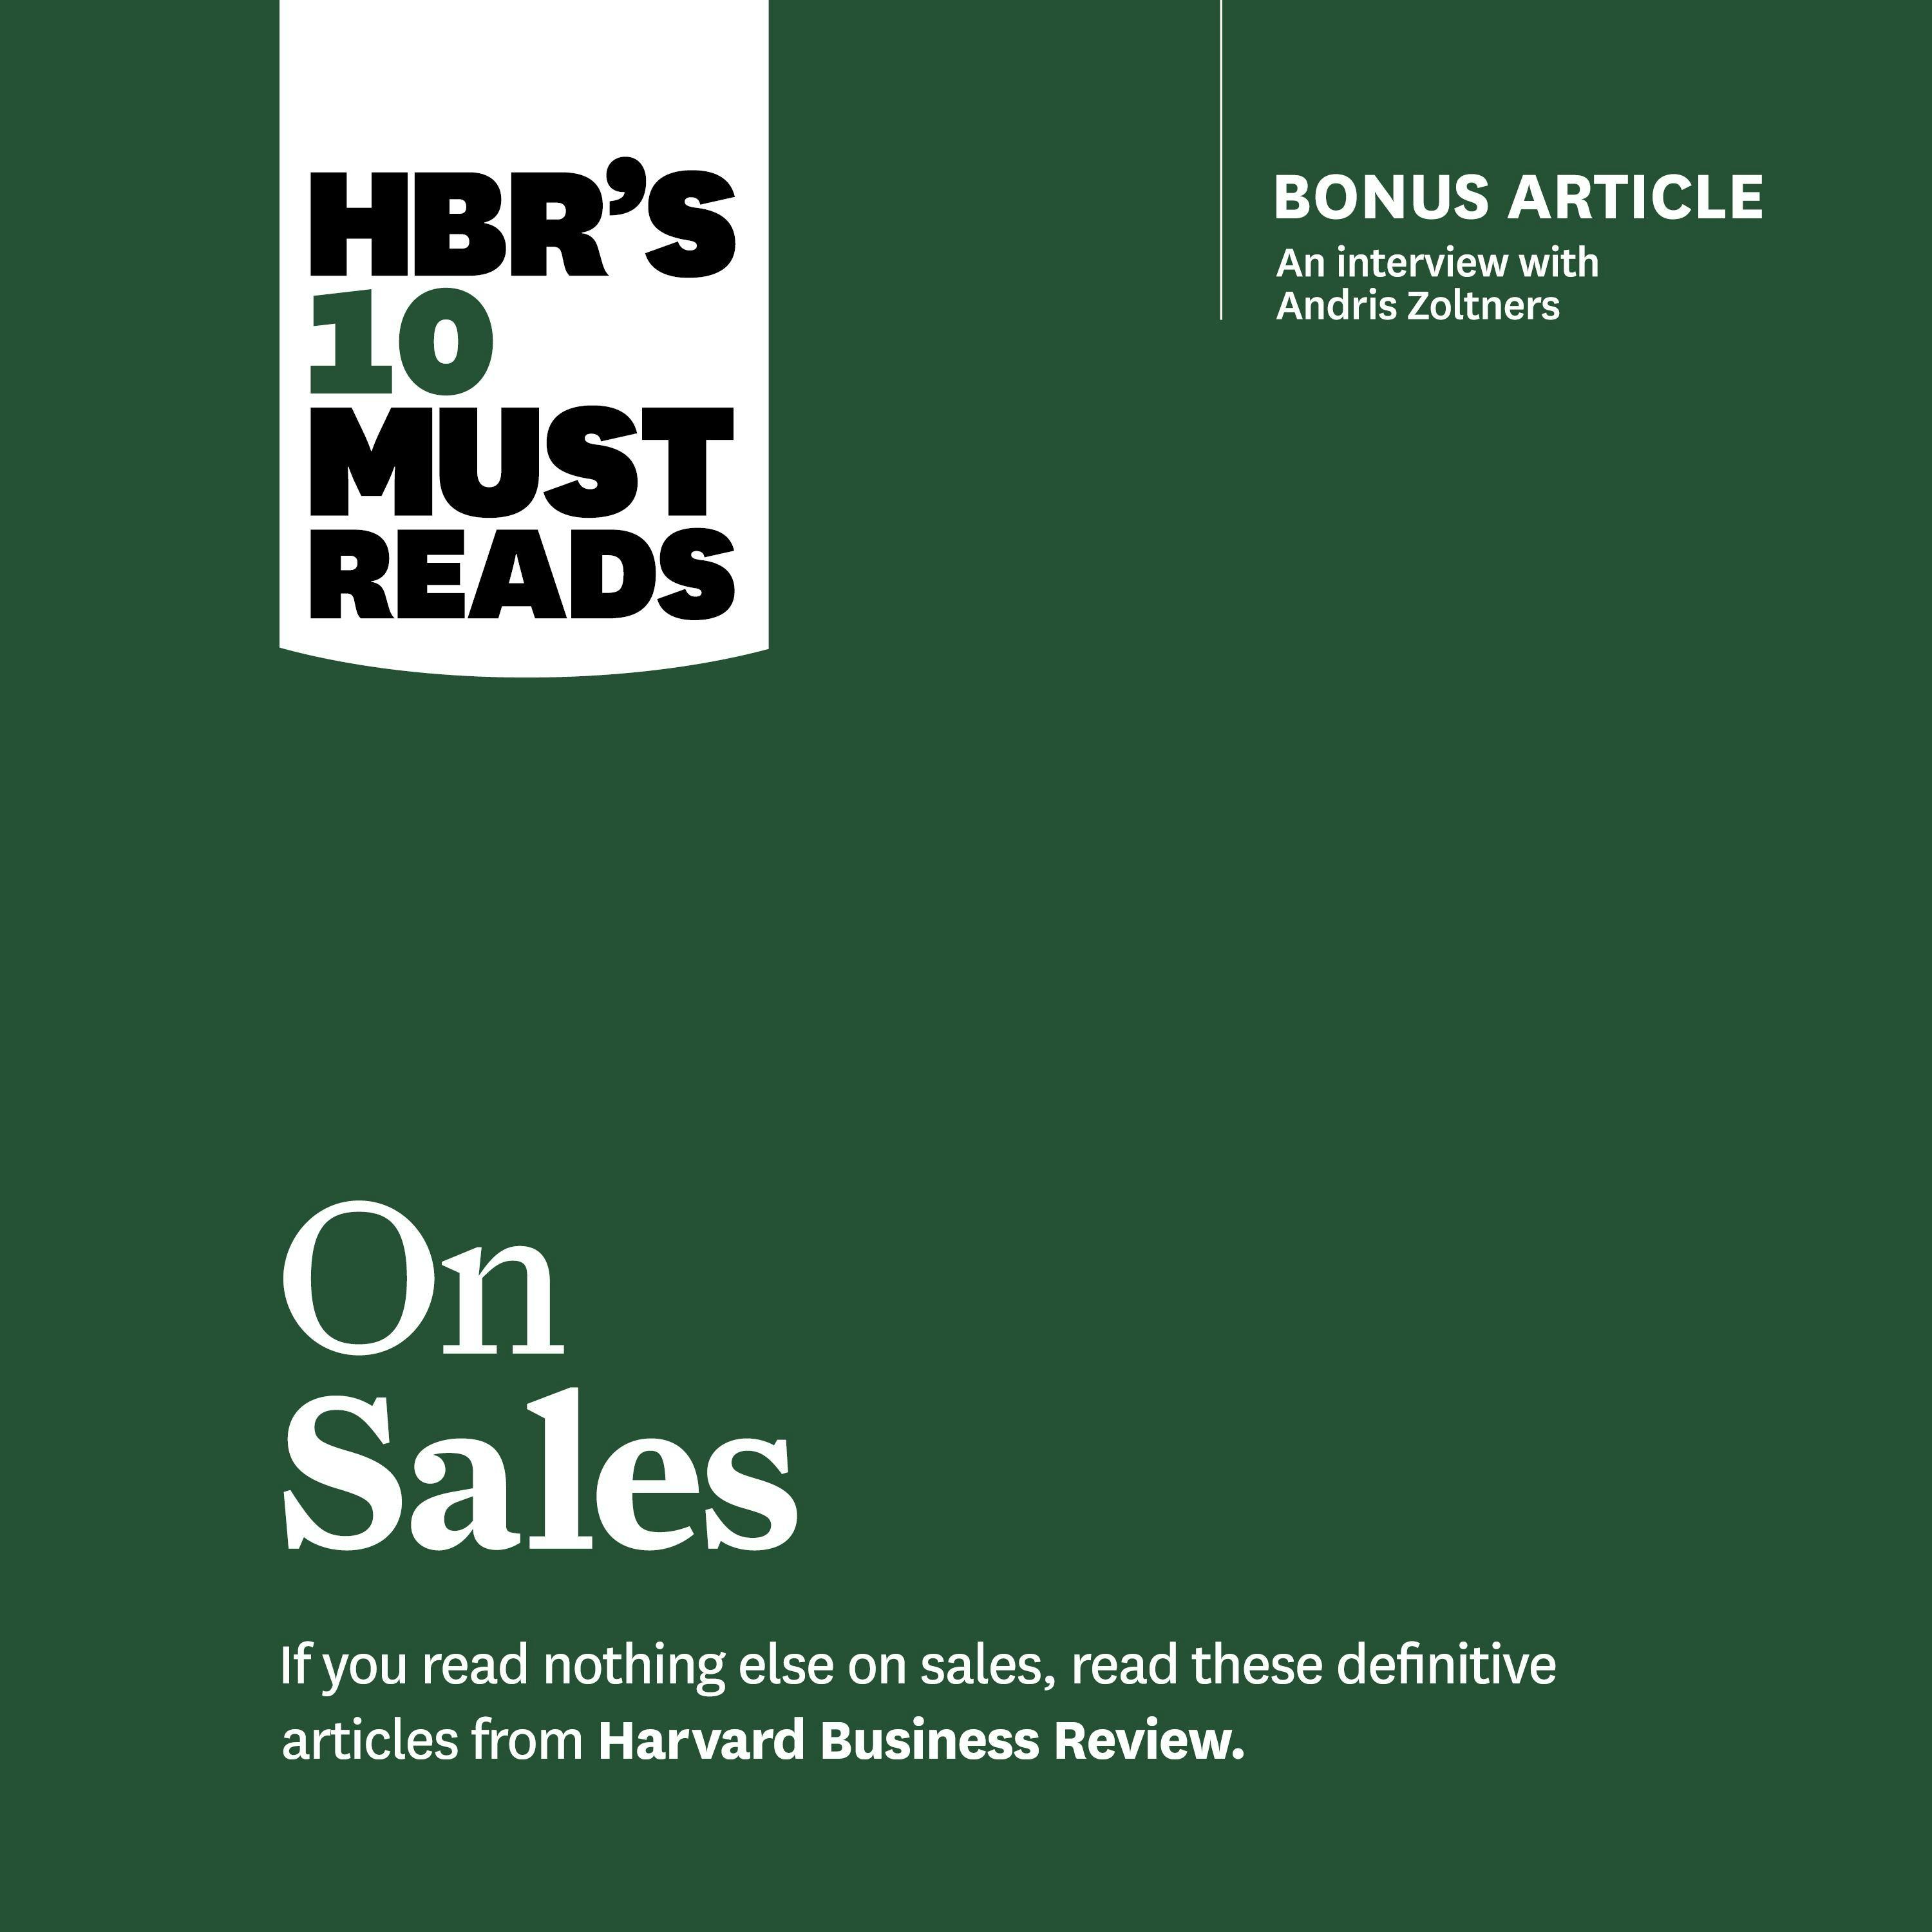 HBR's 10 Must Reads on Sales - Andris Zoltners, Philip Kotler, Harvard Business Review, James C. Anderson, Manish Goyal